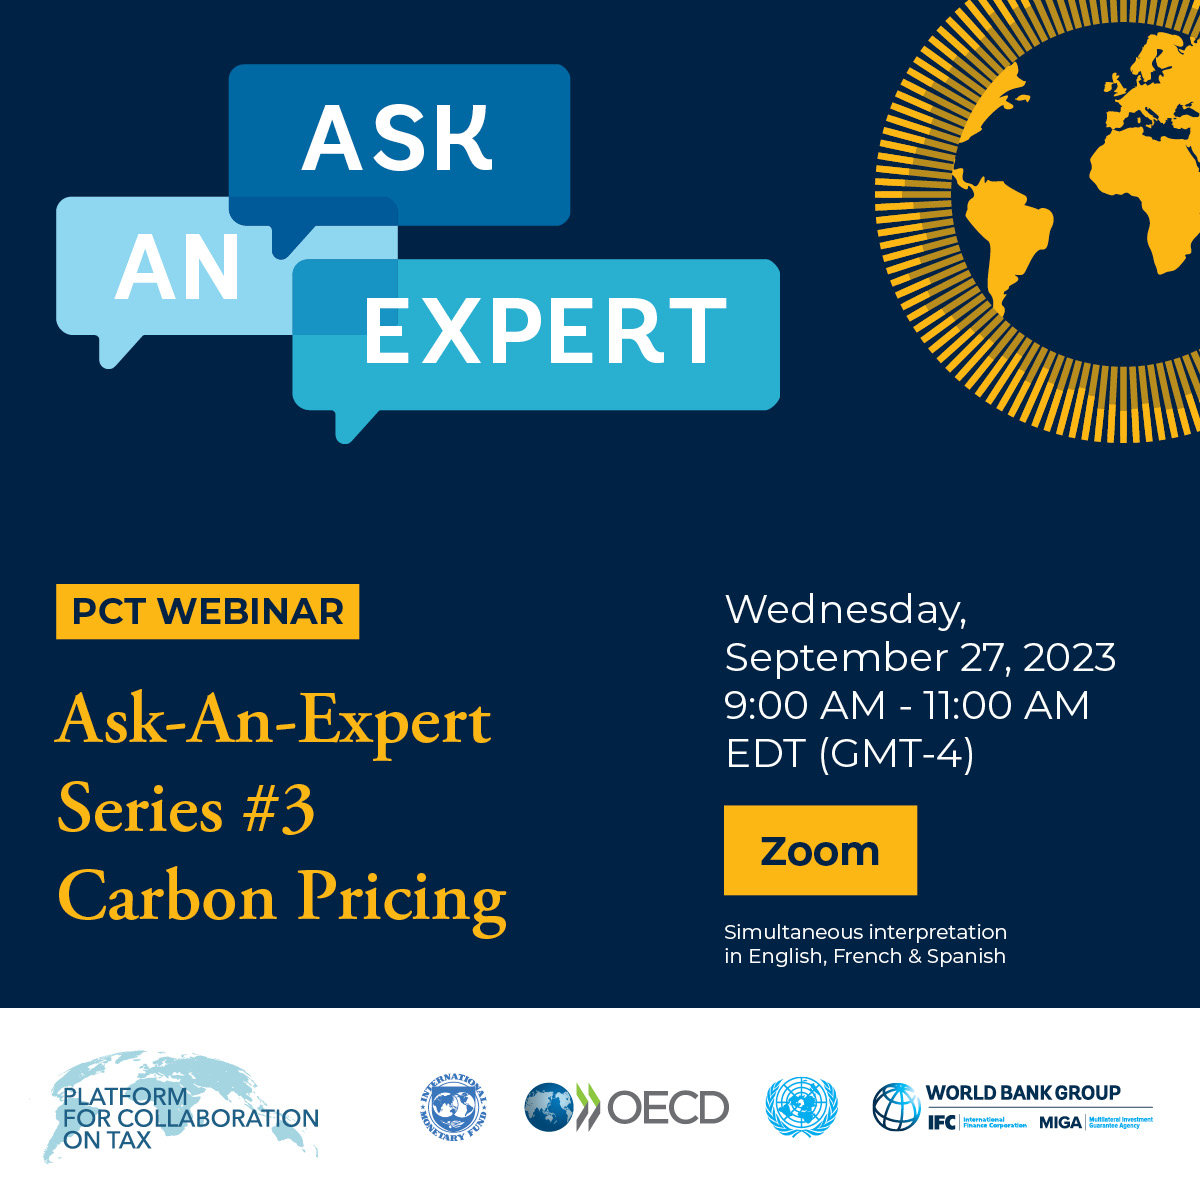 Square image of the PCT Ask-An-Expert Webinar flyer